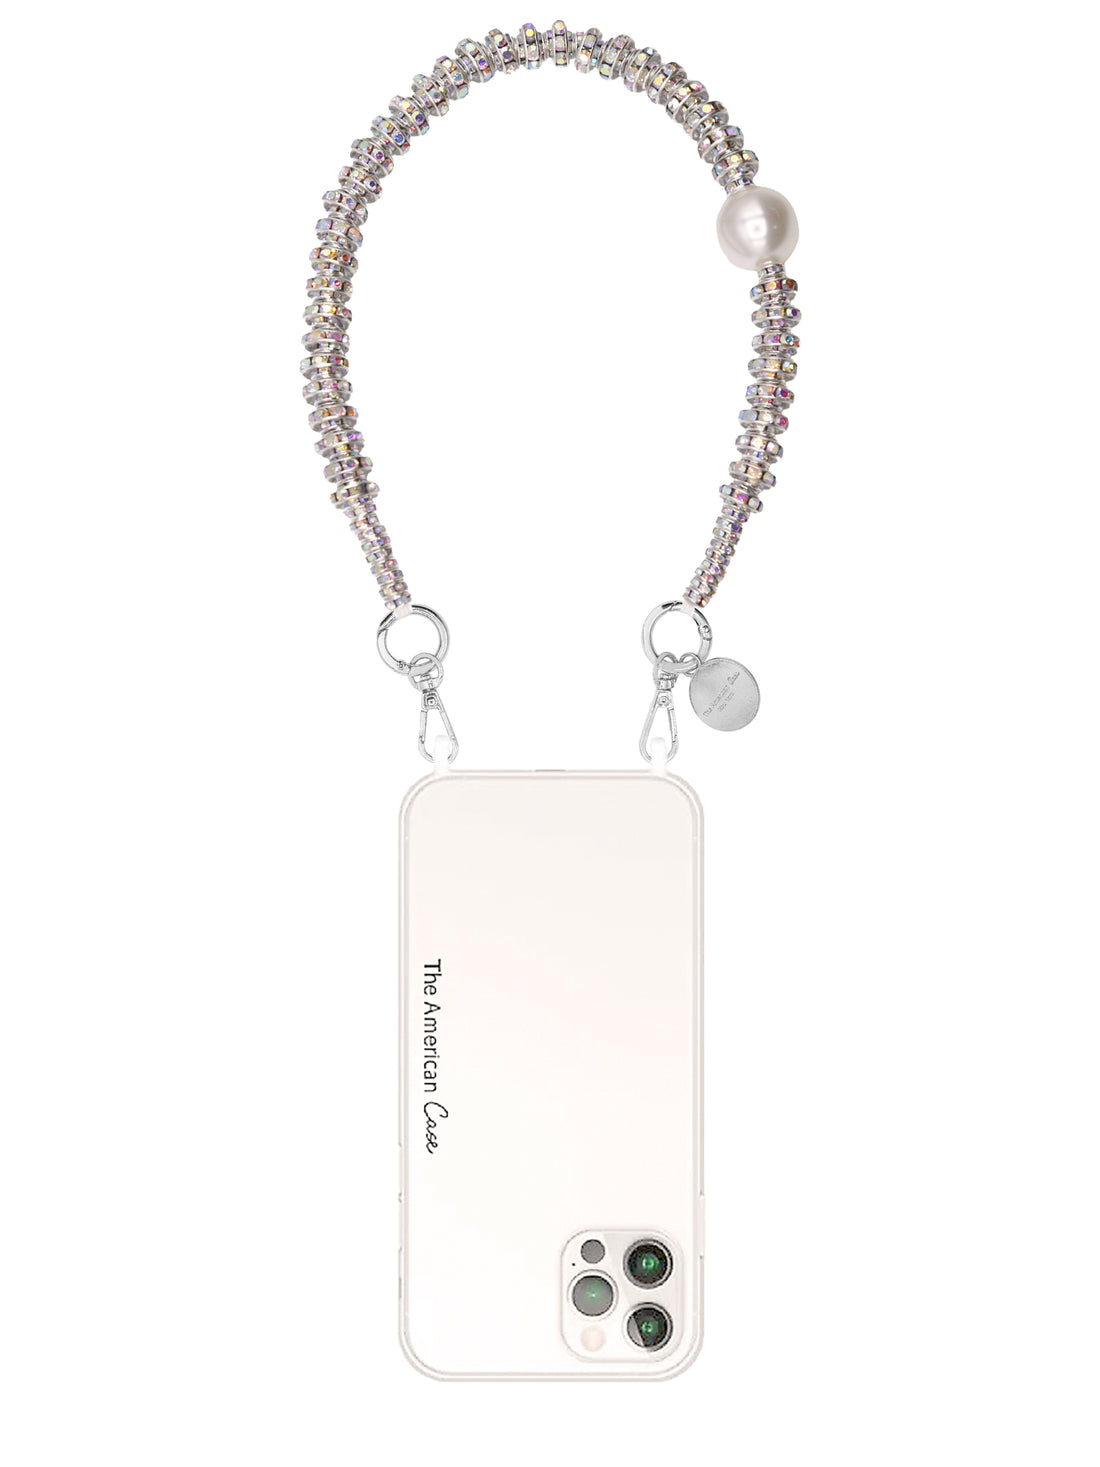 Carina - Crystal Bracelet Chain for Phone with Pearl Decor